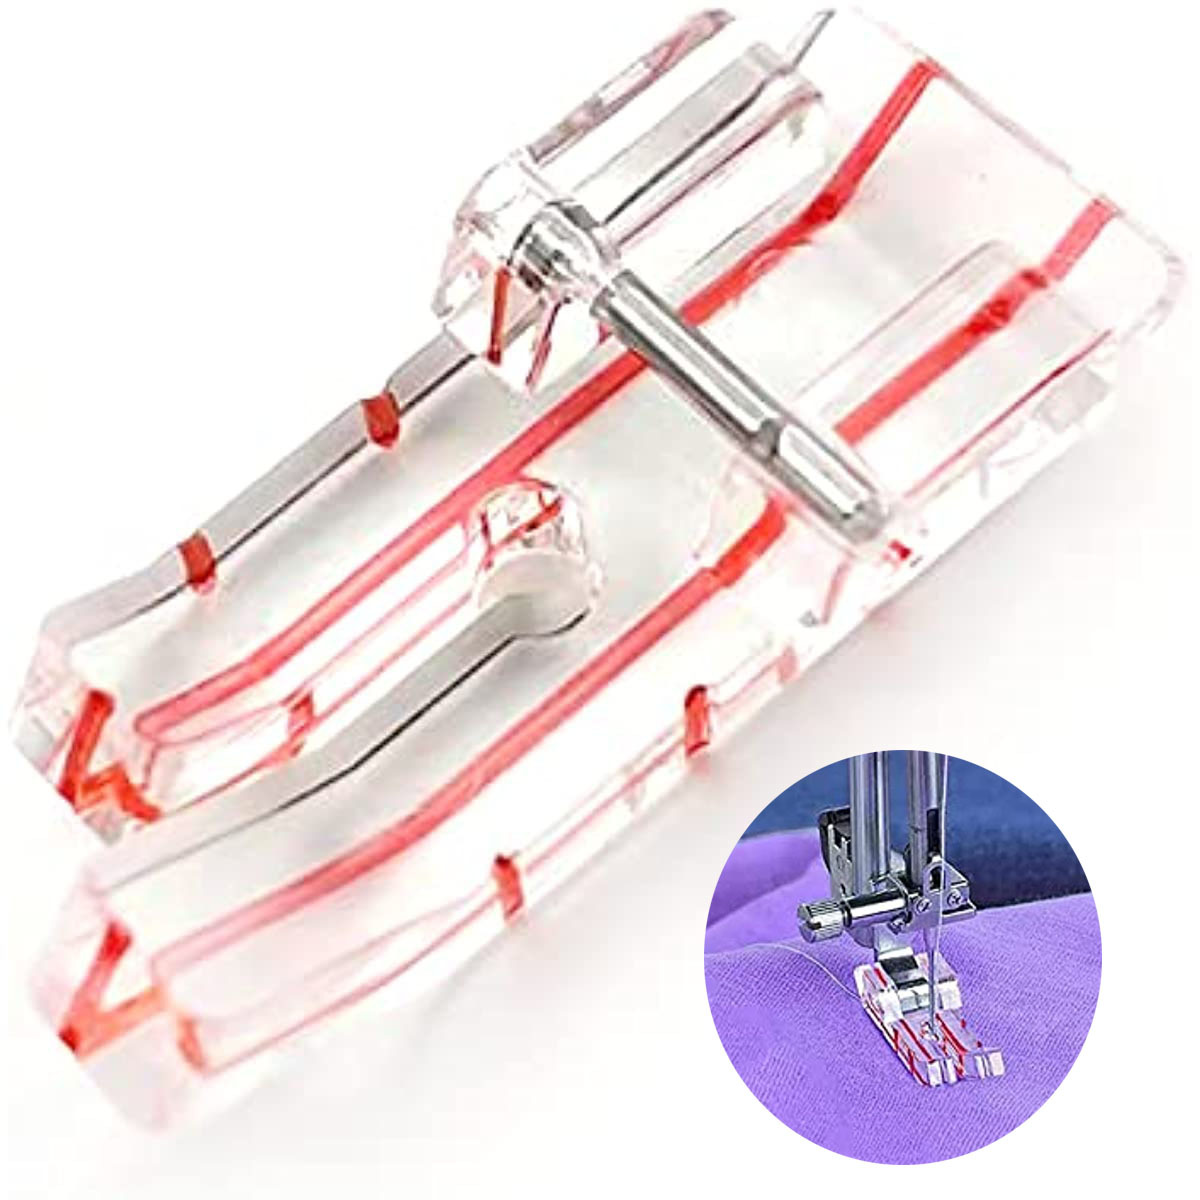 TISEKER Zipper Sewing Machine Presser Foot Fits for All Low Shank Snap on  Singer, Brother, Babylock, Janome, Kenmore, White, Juki, New Home,  Simplicity, Elna, Husqvarna, Janome, Bernina and More